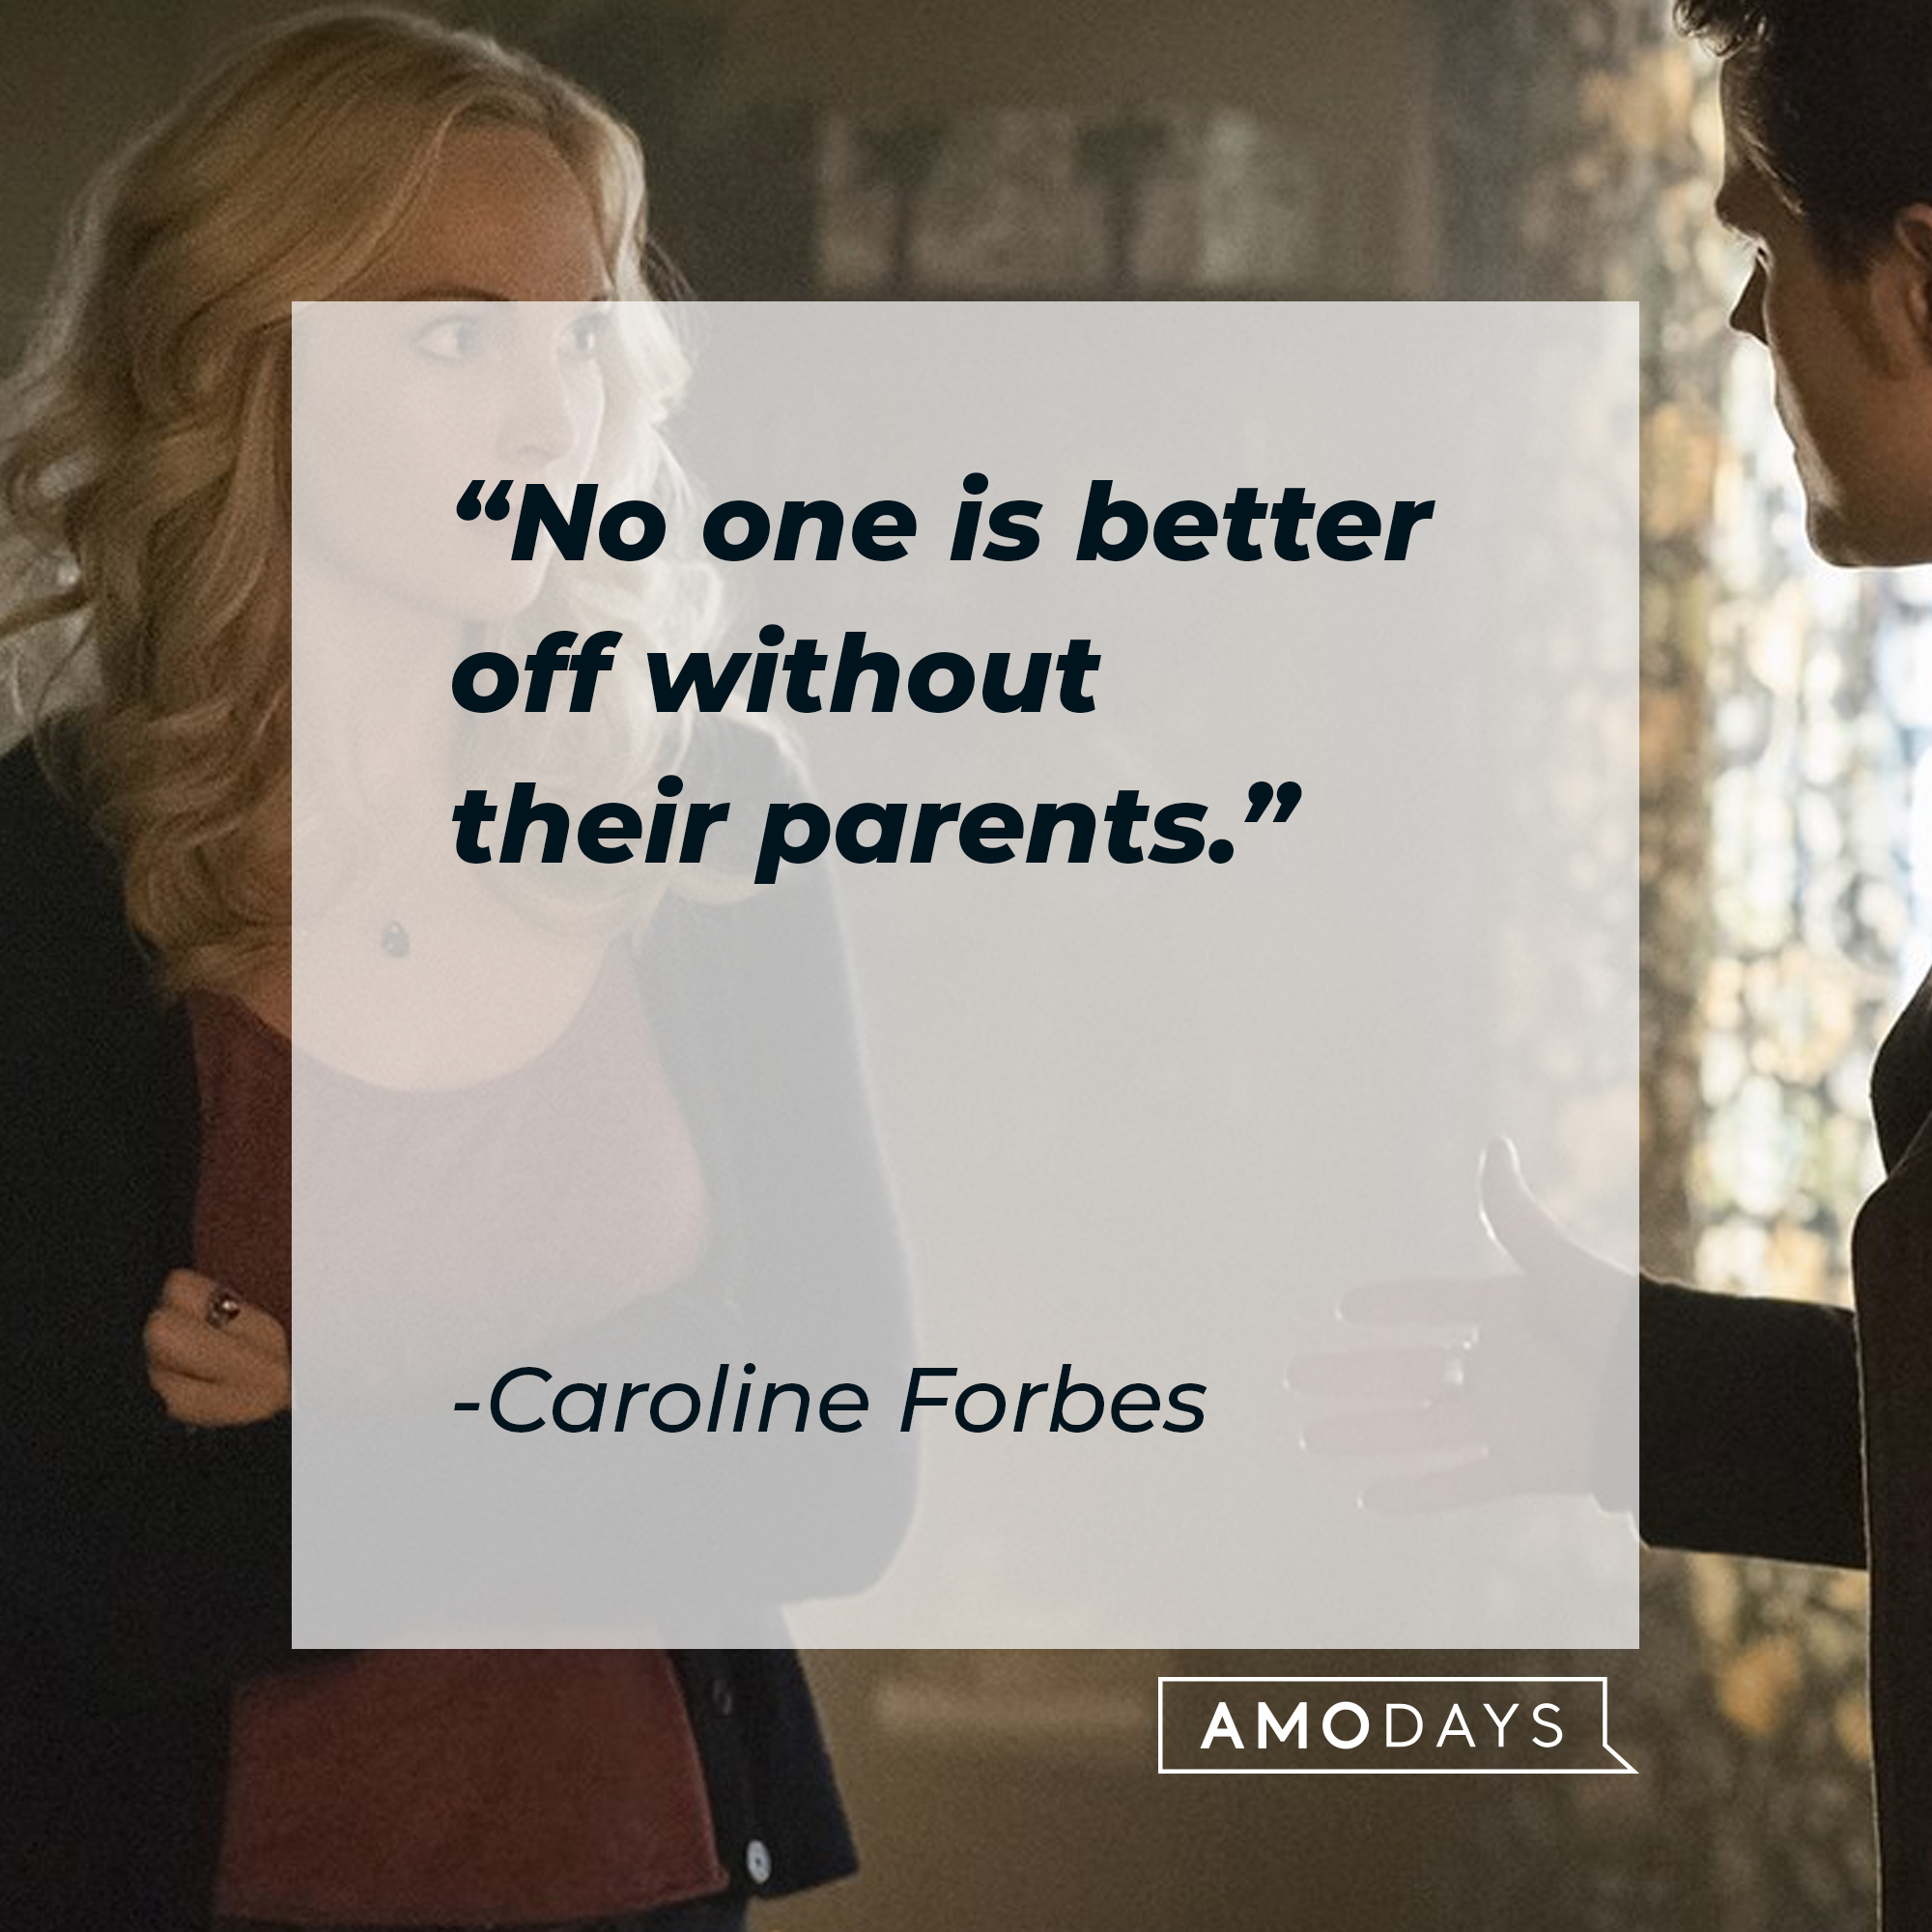 Caroline Forbes' quote: "No one is better off without their parents." | Source: Facebook.com/thevampirediaries